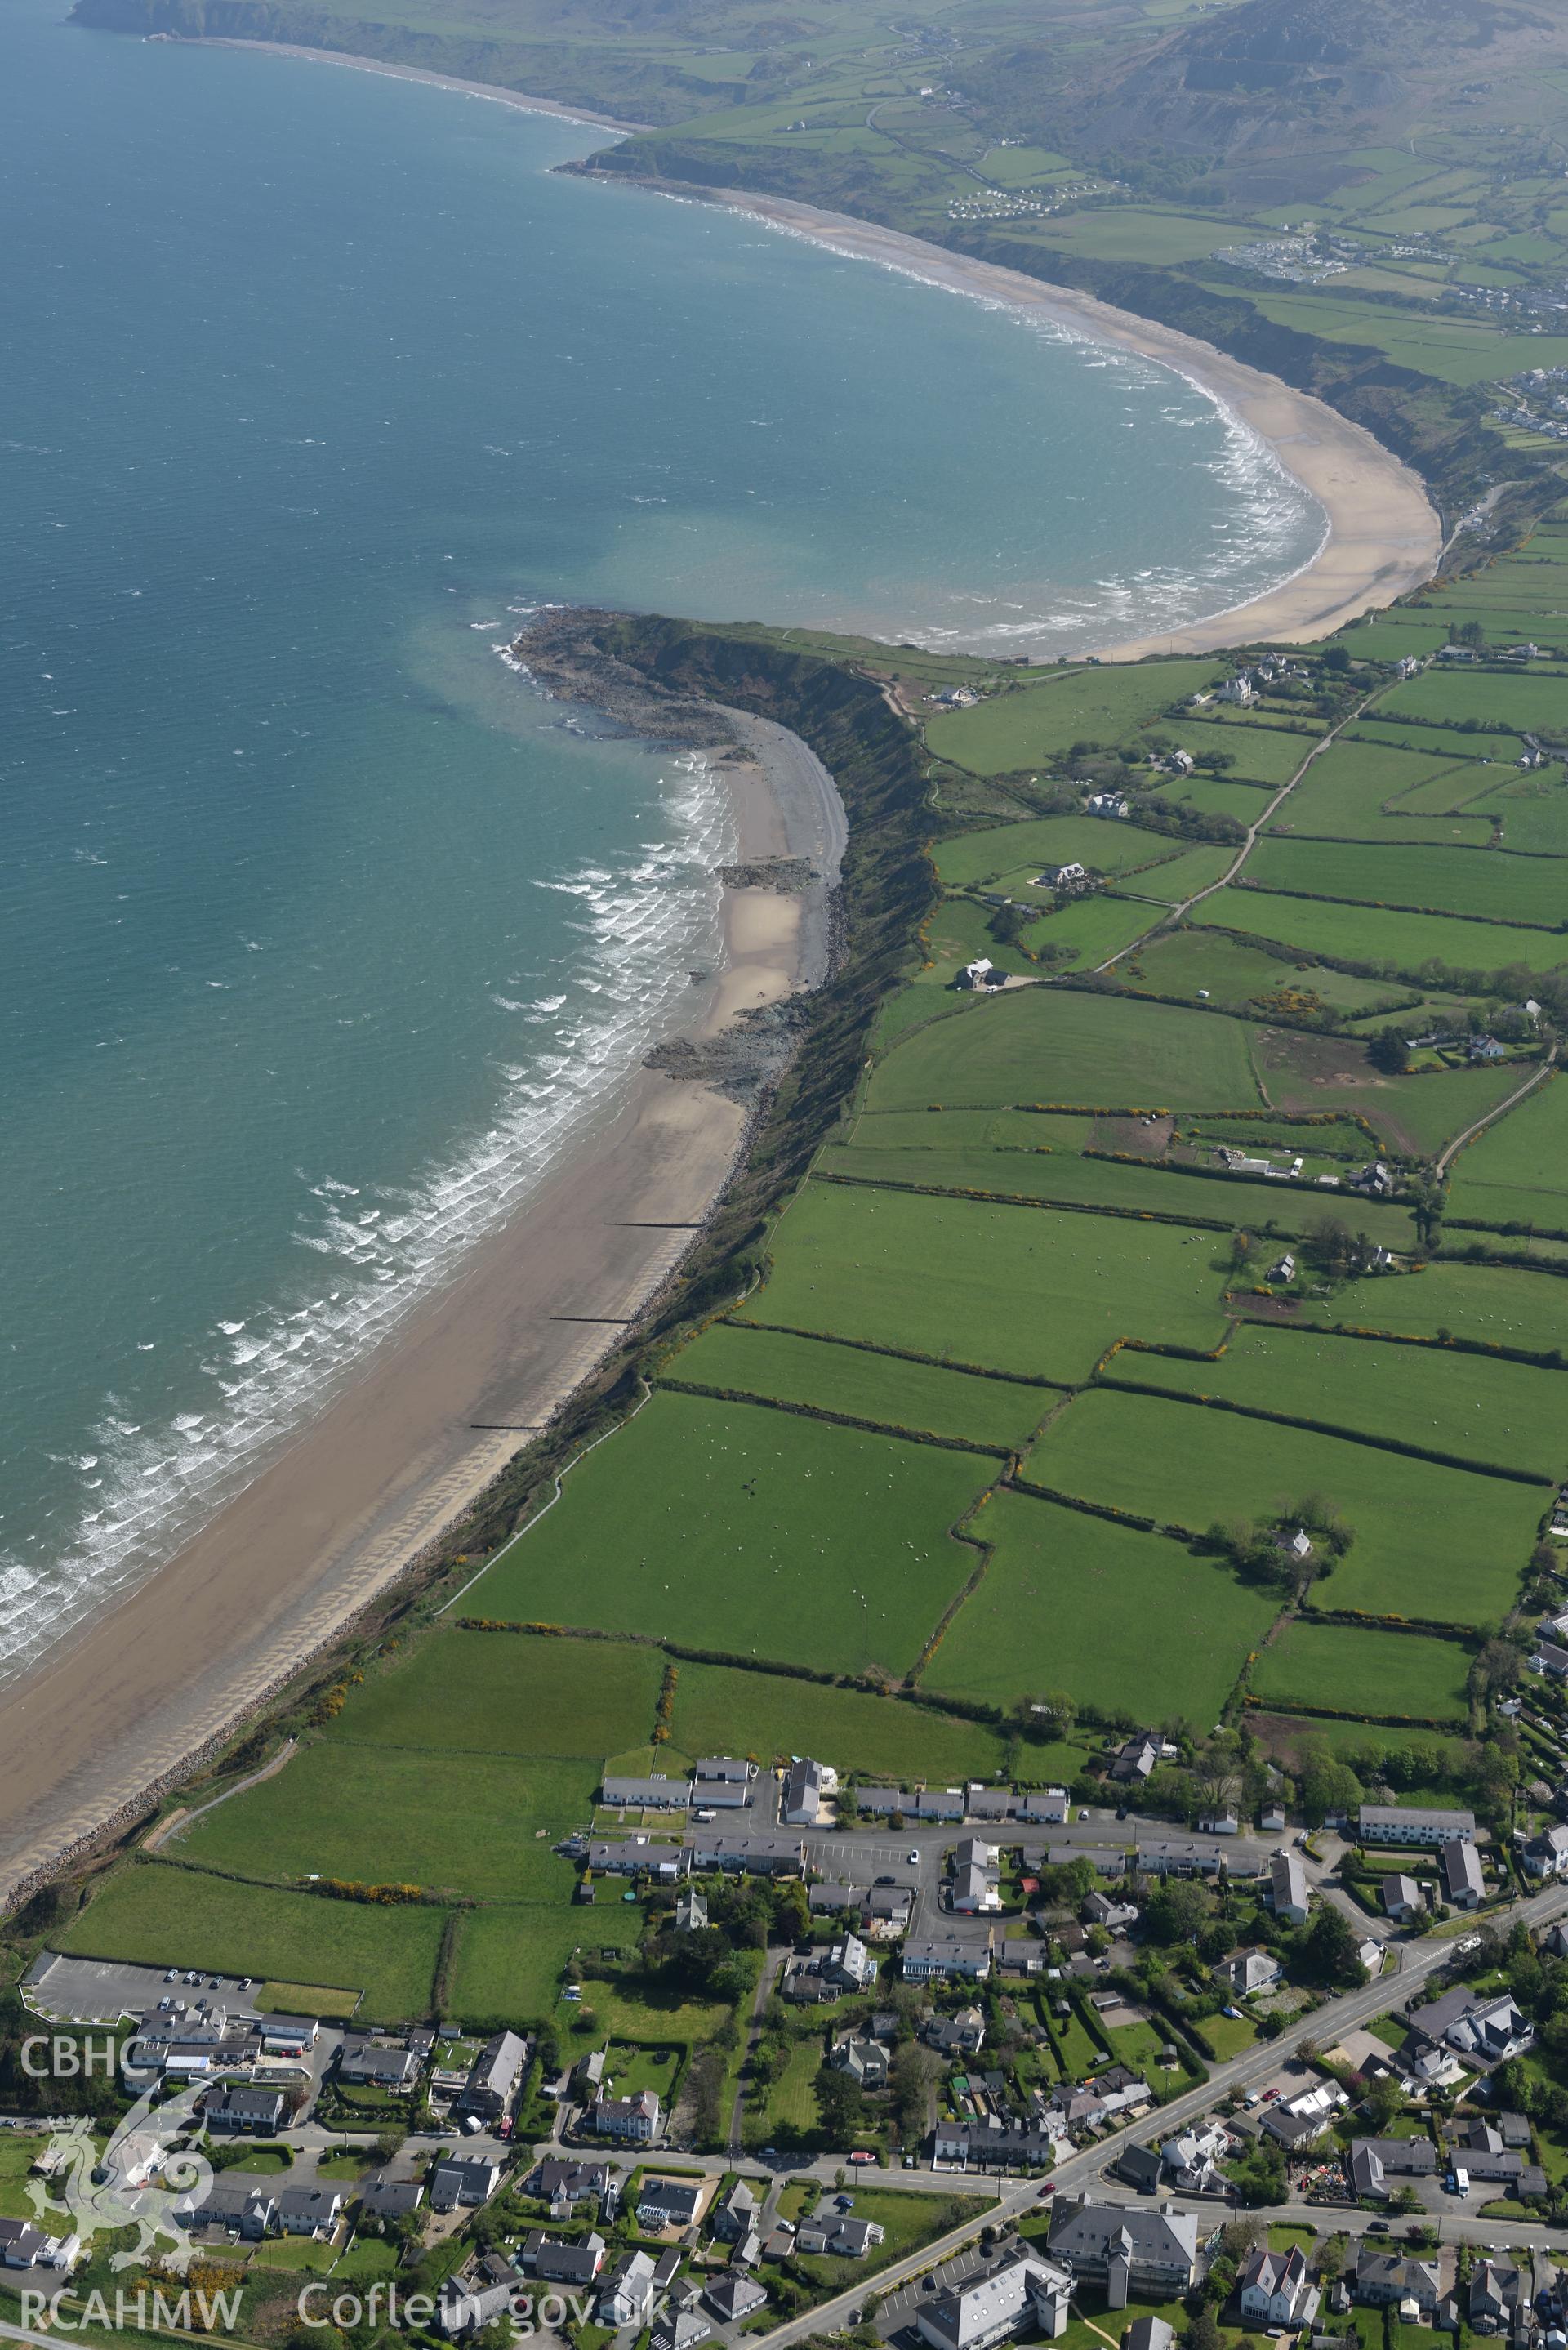 Aerial photography of Morfa Nefyn taken on 3rd May 2017.  Baseline aerial reconnaissance survey for the CHERISH Project. ? Crown: CHERISH PROJECT 2017. Produced with EU funds through the Ireland Wales Co-operation Programme 2014-2020. All material made freely available through the Open Government Licence.